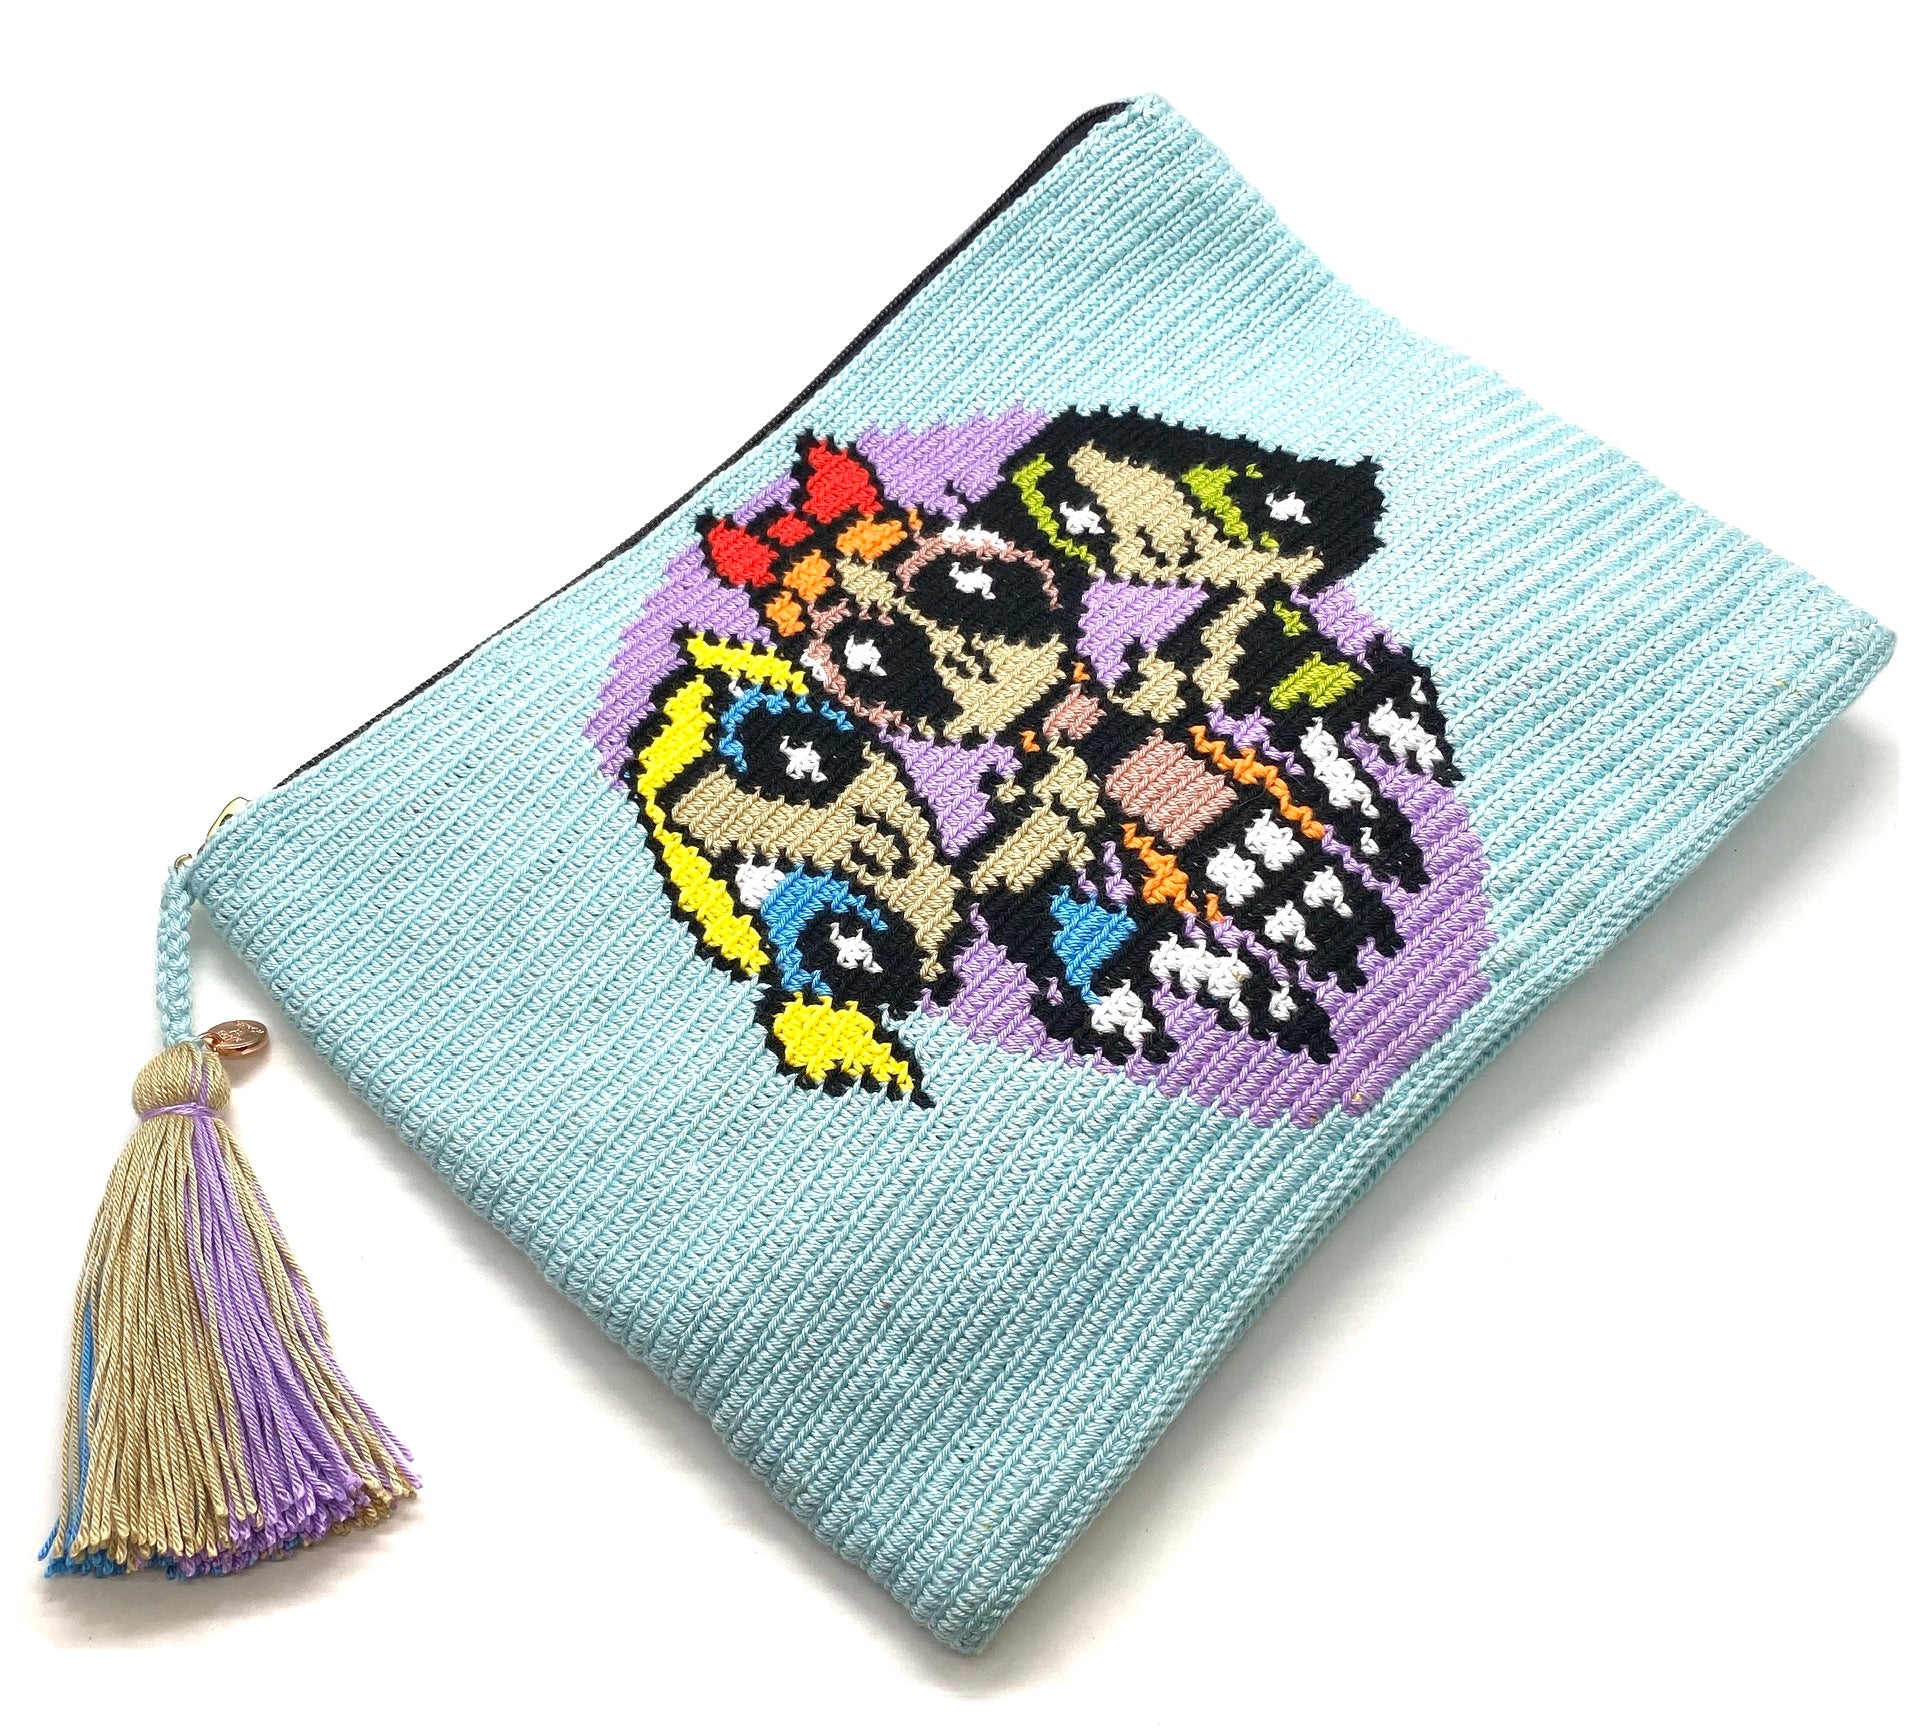 Power puff clutch, lavender circle, sky blue body with tassel.